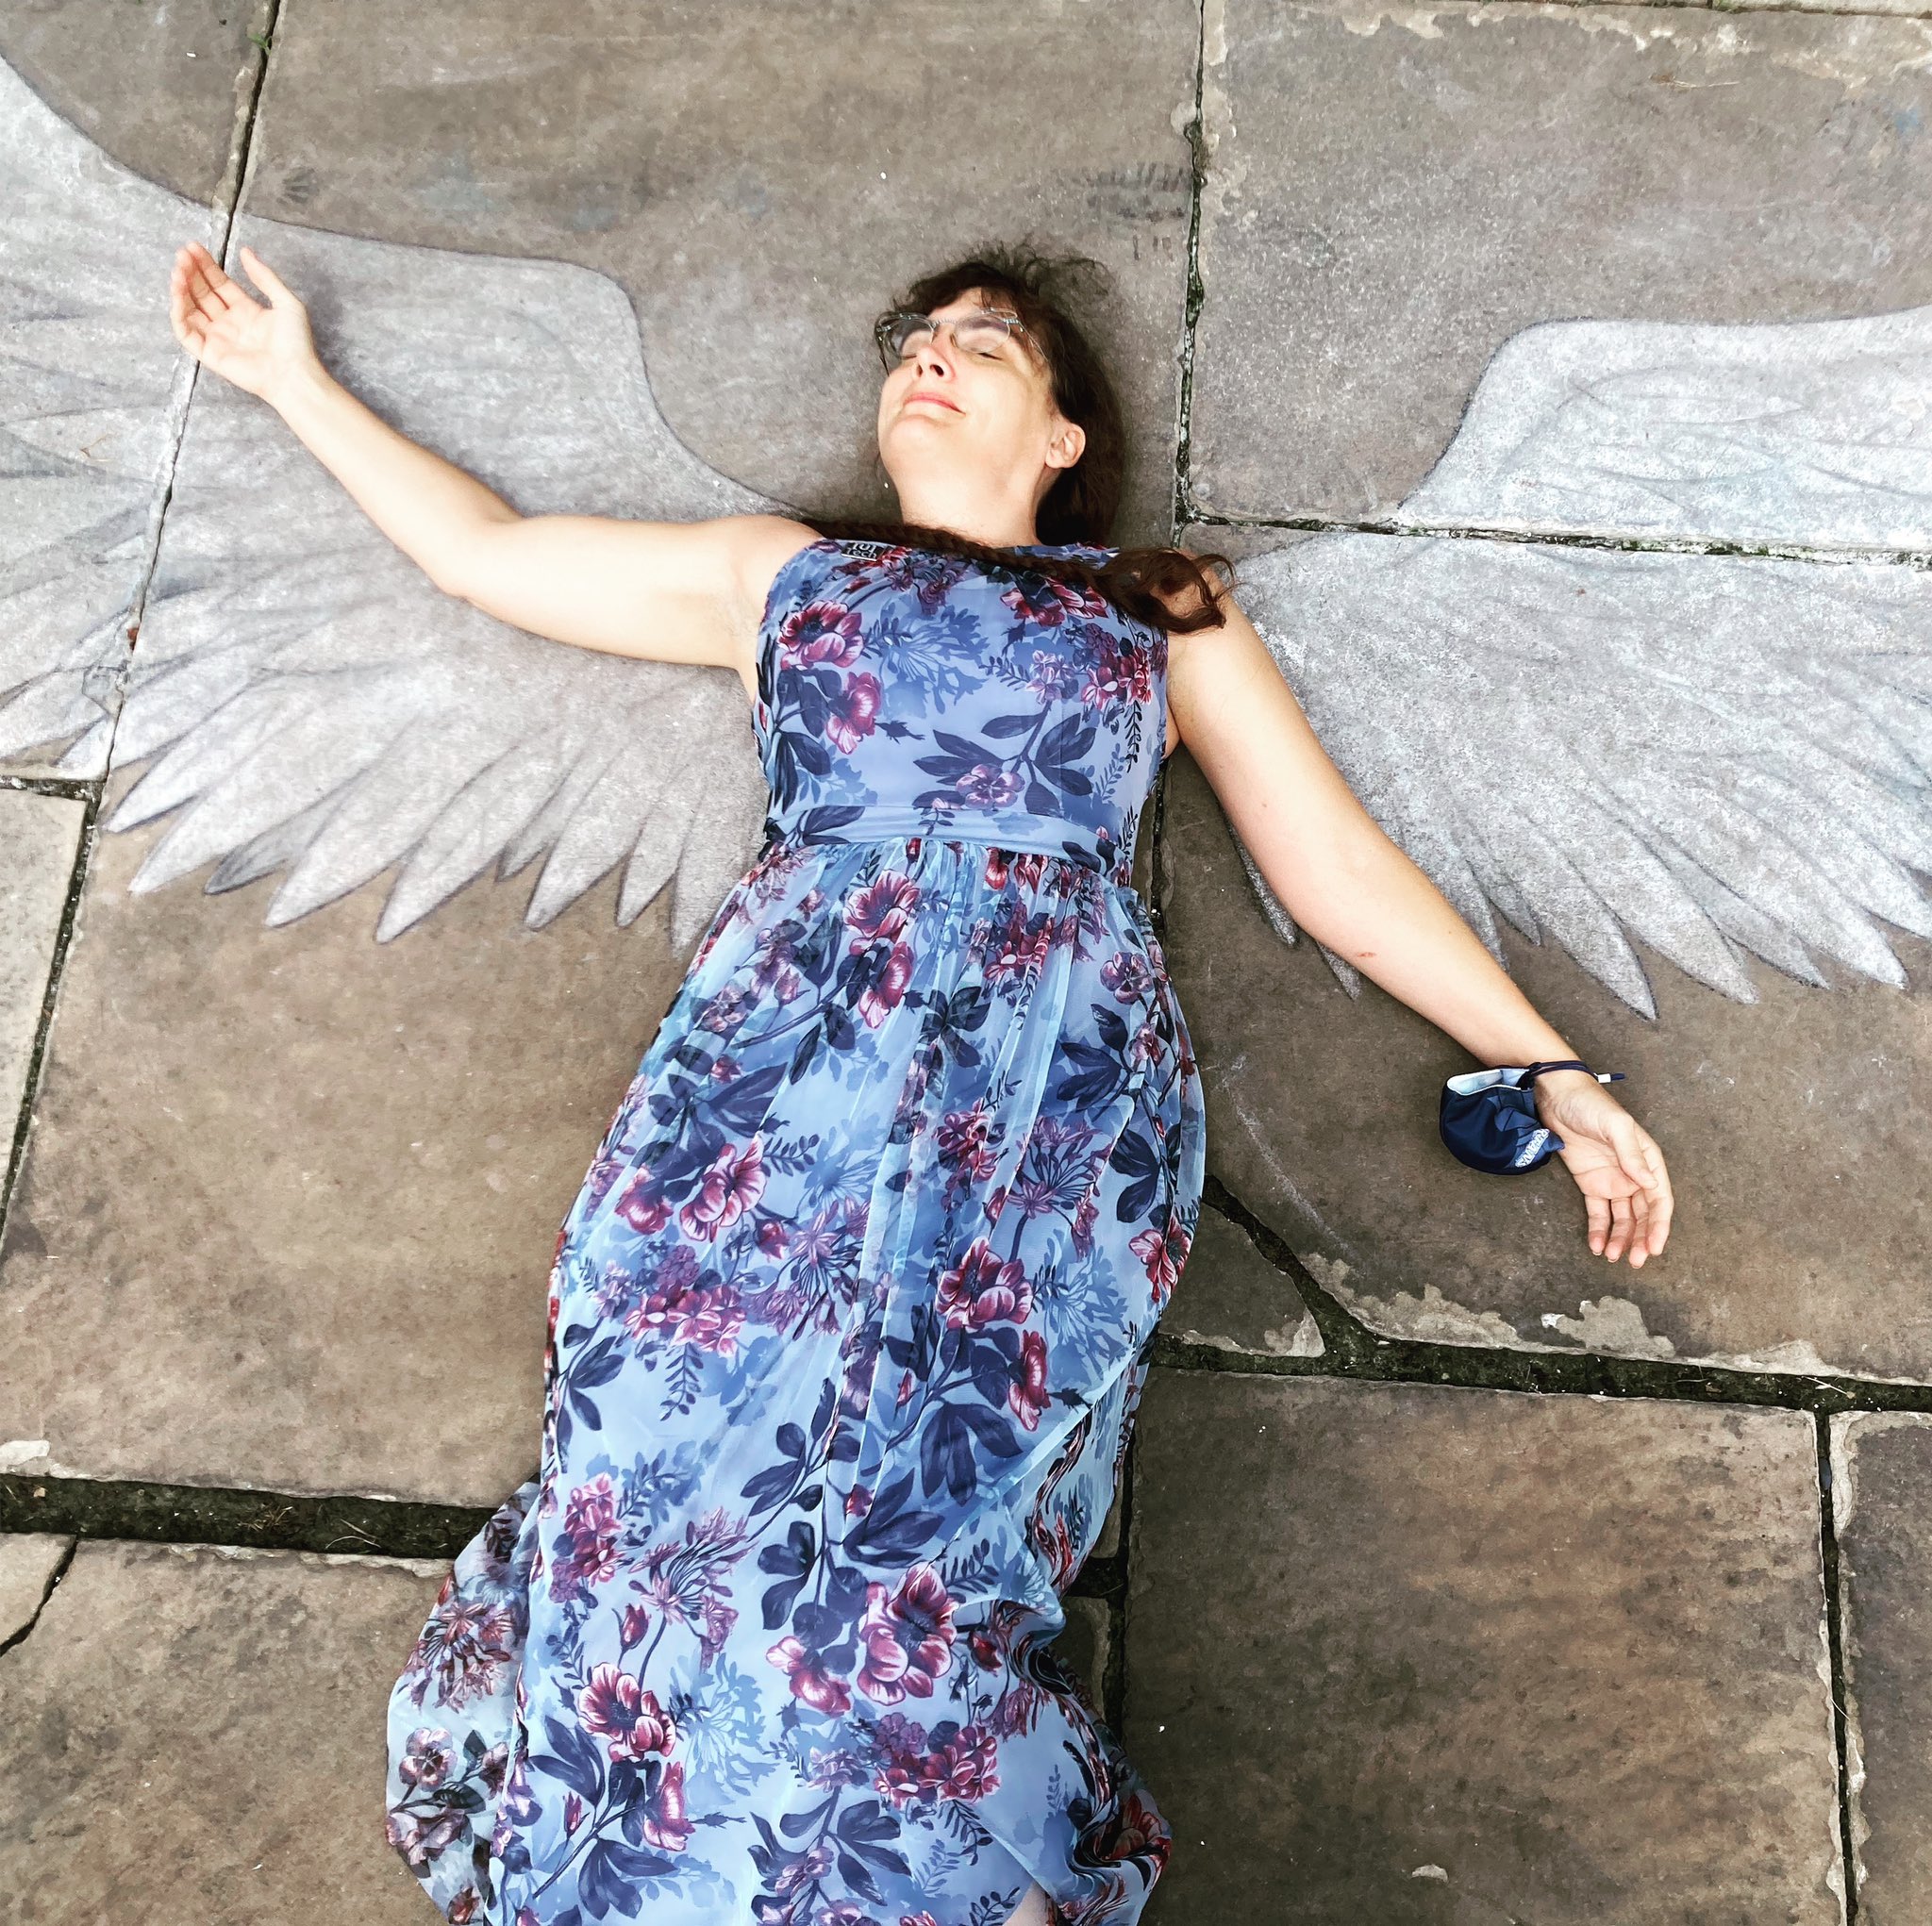 Marie lays on a chalk drawing of angel wings.